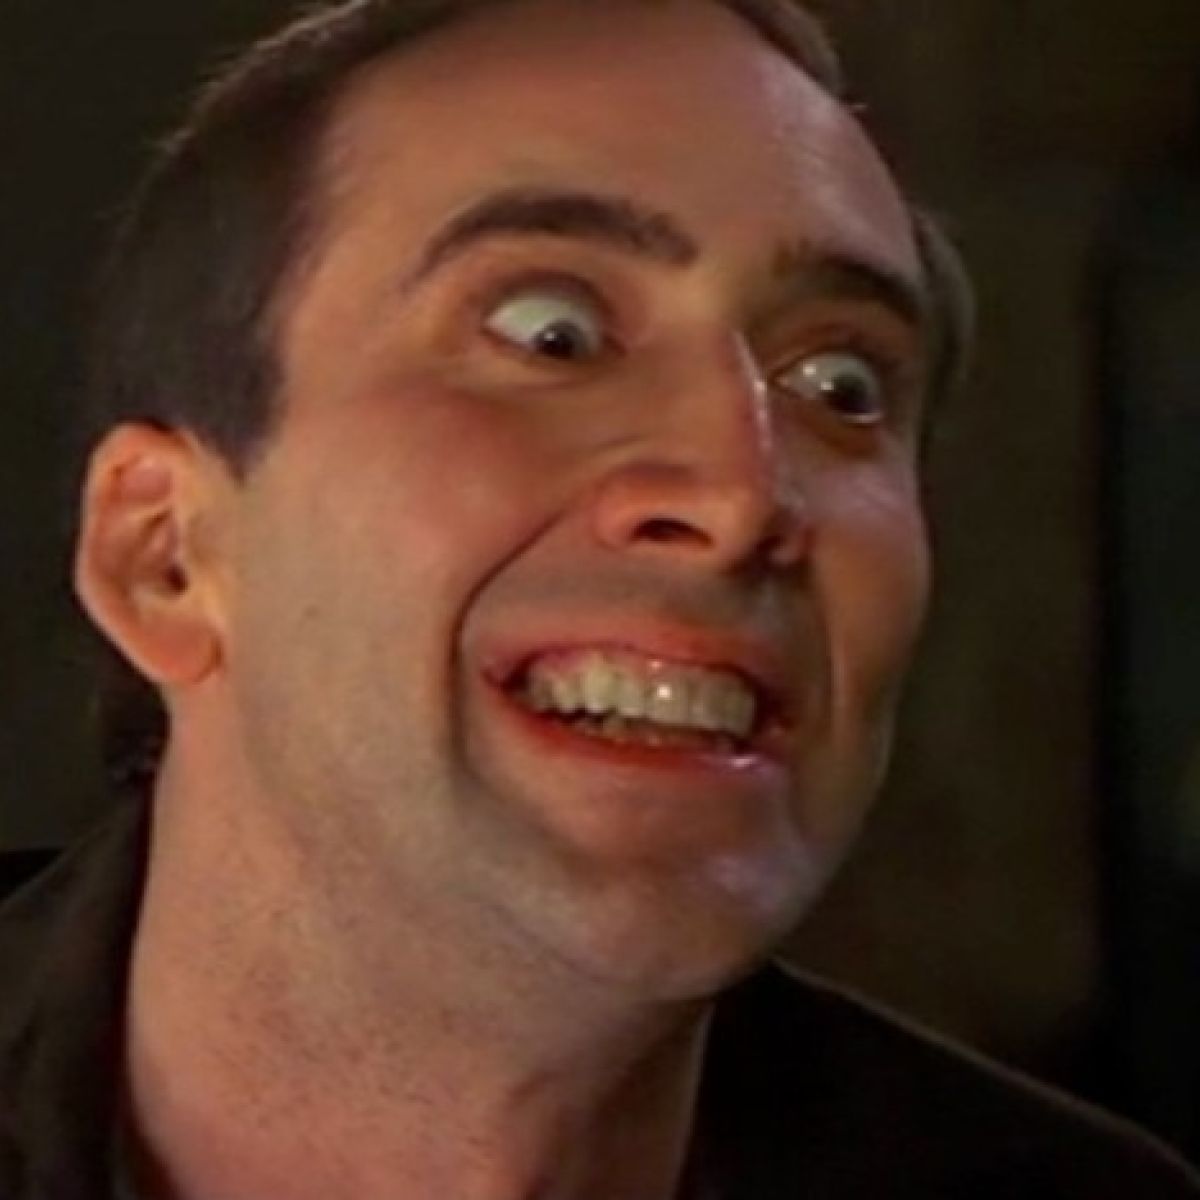 Machine Learning Puts Nicolas Cage In Every Picture